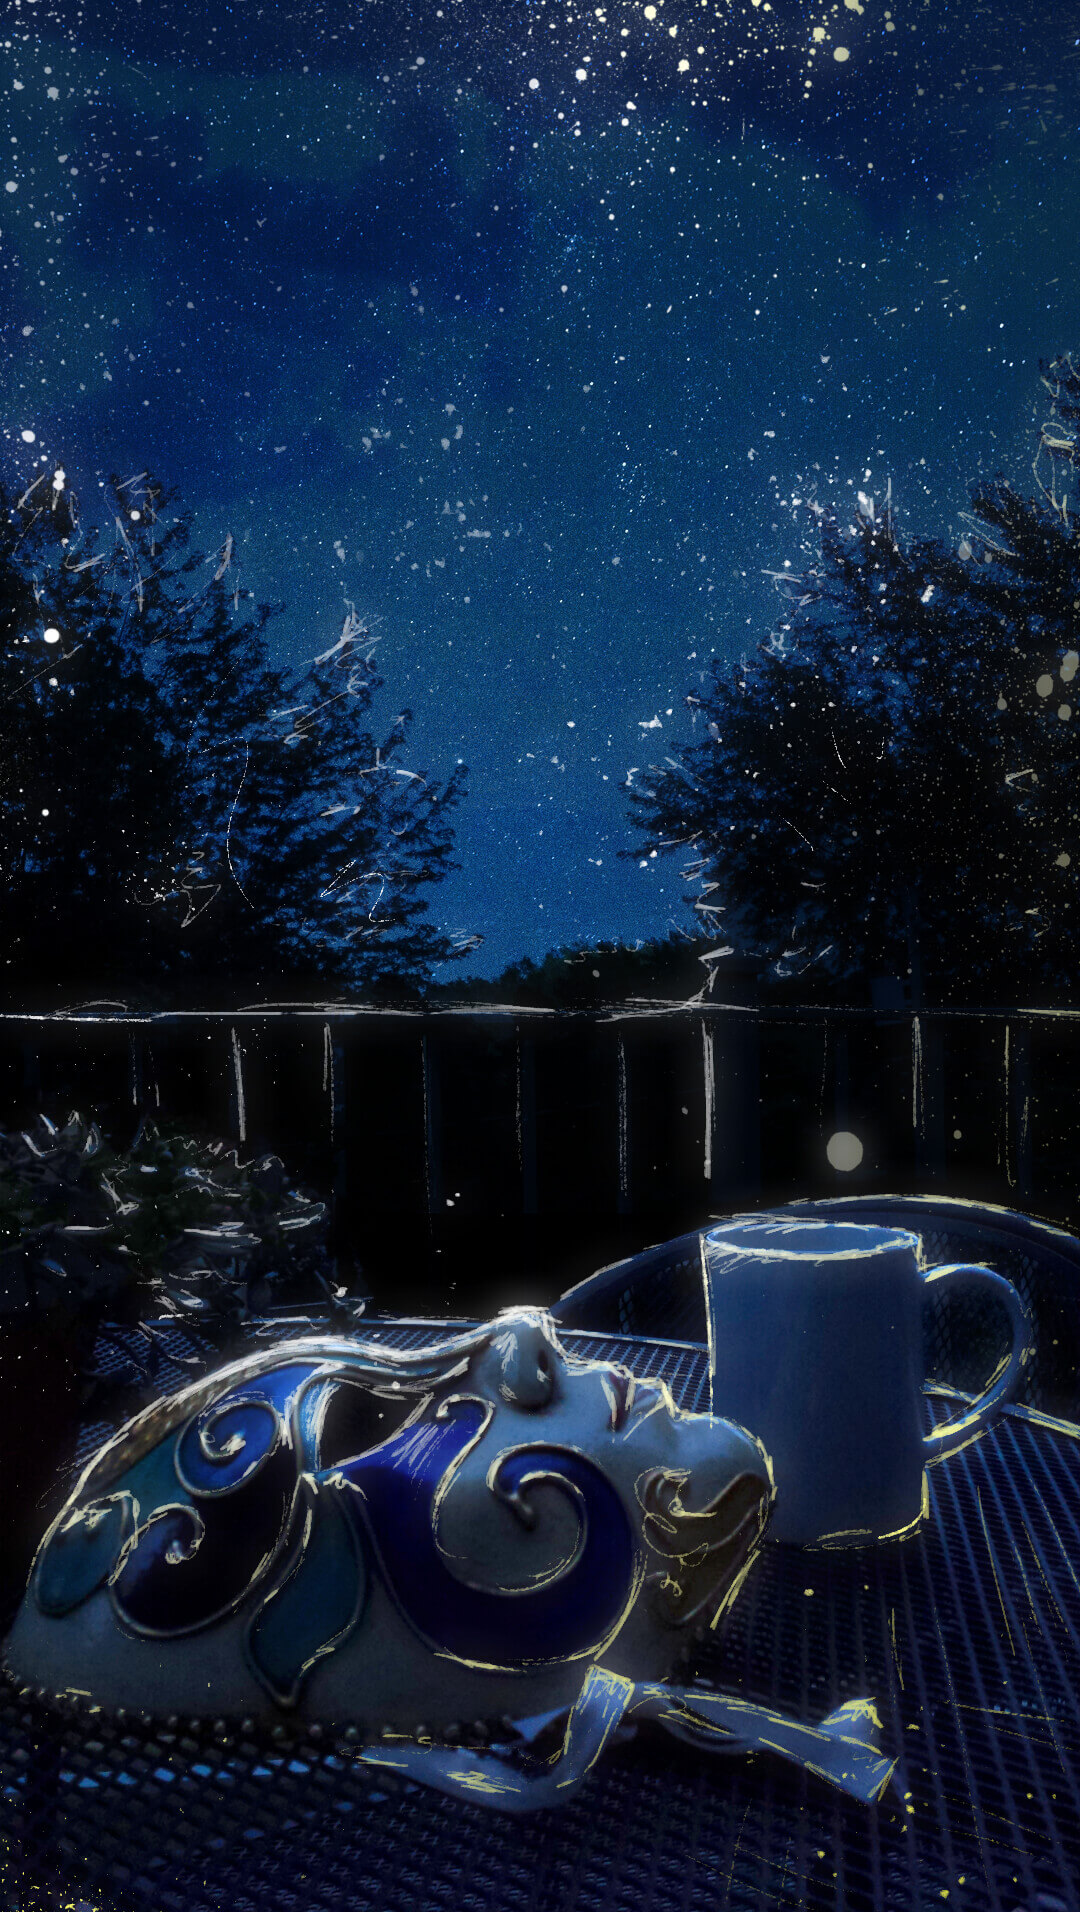 A mask sits on a table outdoors under a brightly lit sky